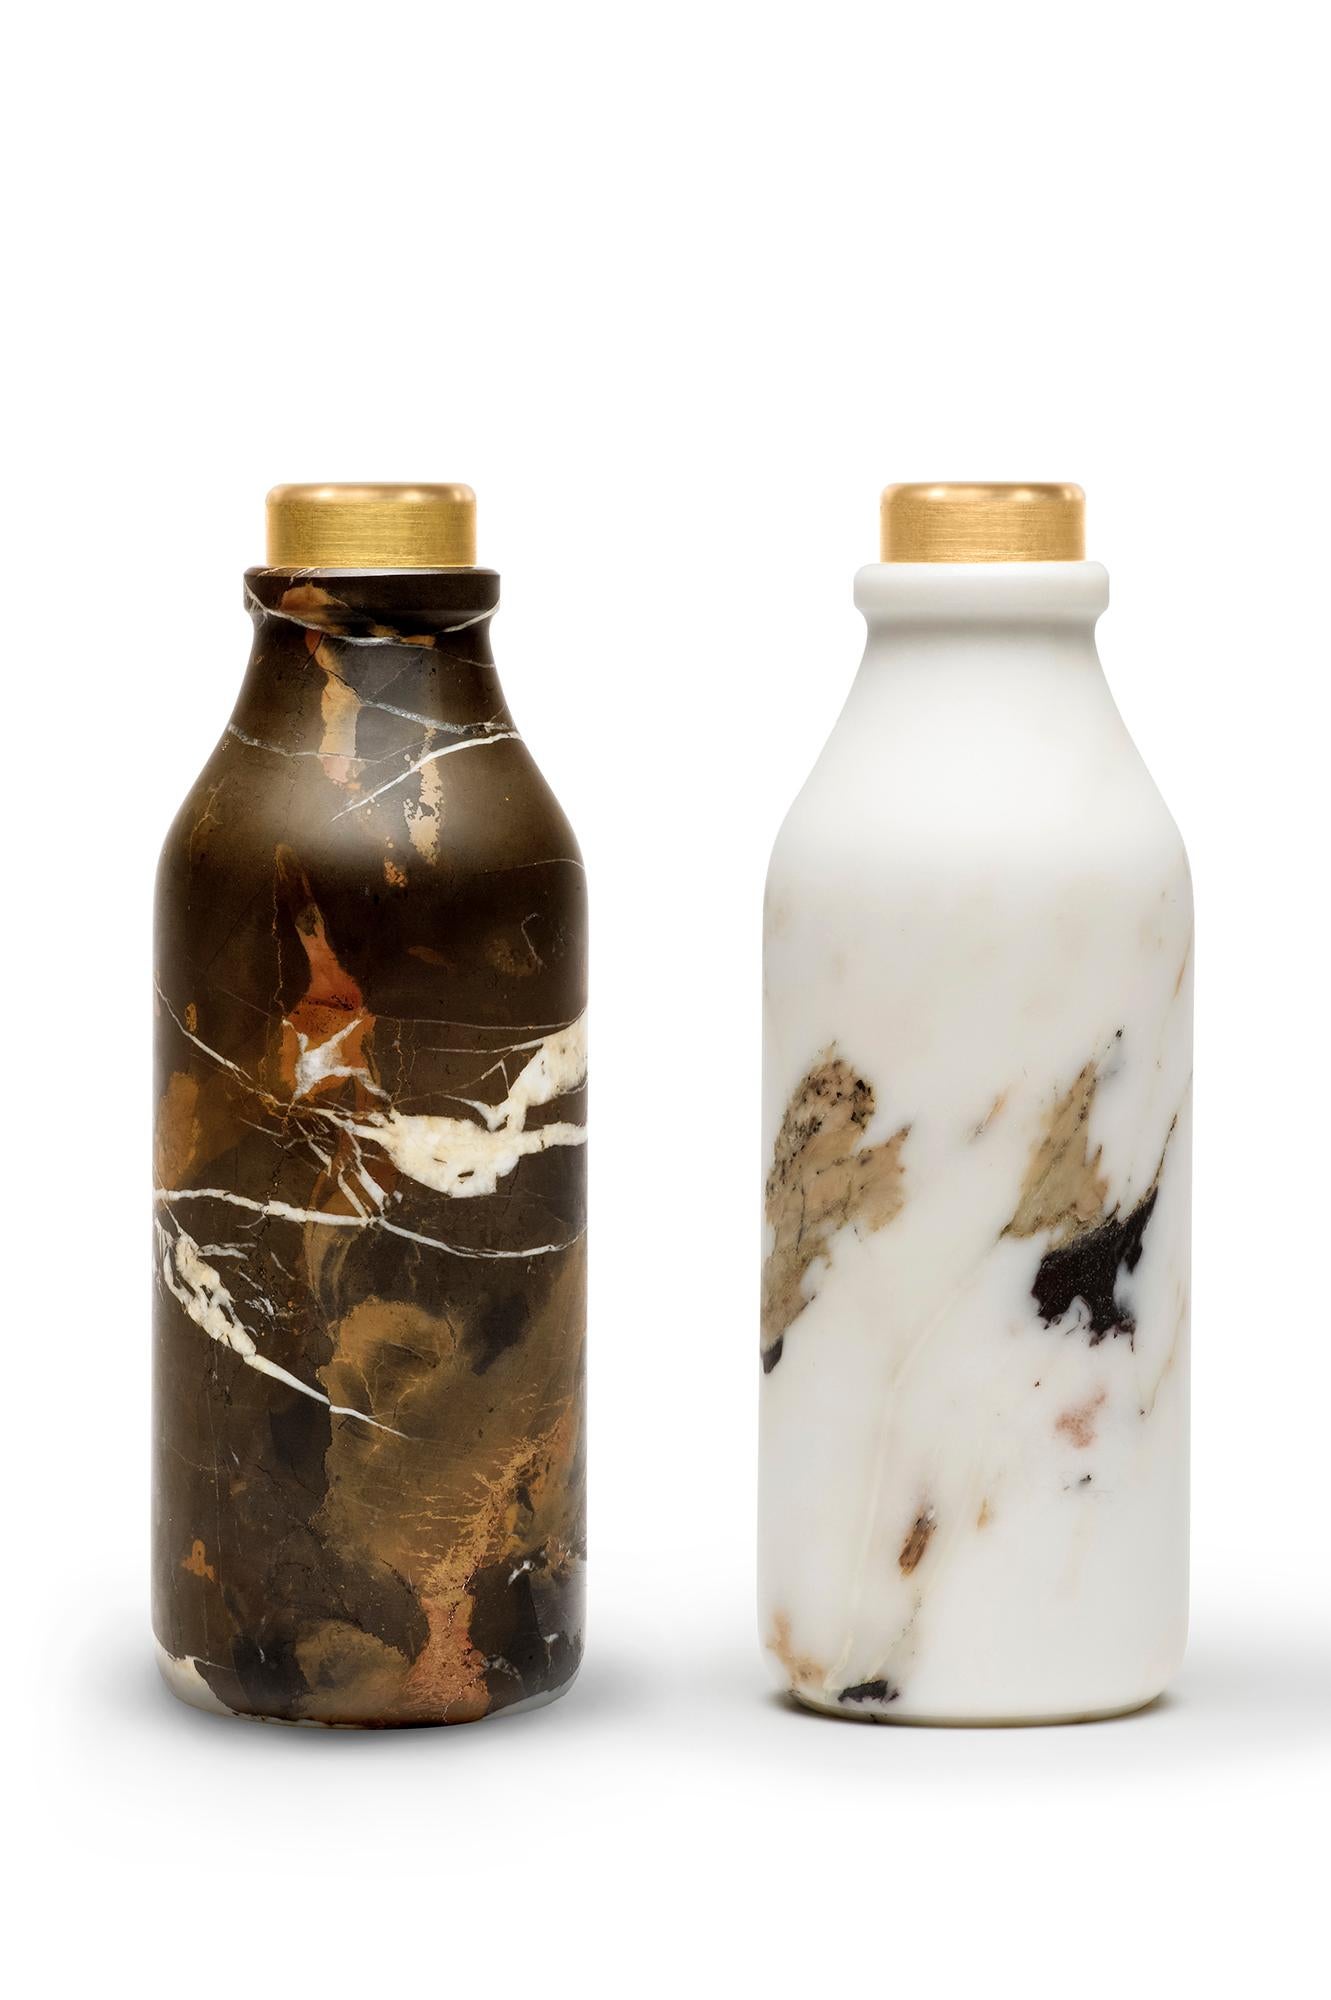 Traditional milk bottle produced in opaque black and gold marble with a brushed brass cap.
Mr Bottle black and gold is made by hand by our expert Tuscan craftsmen.